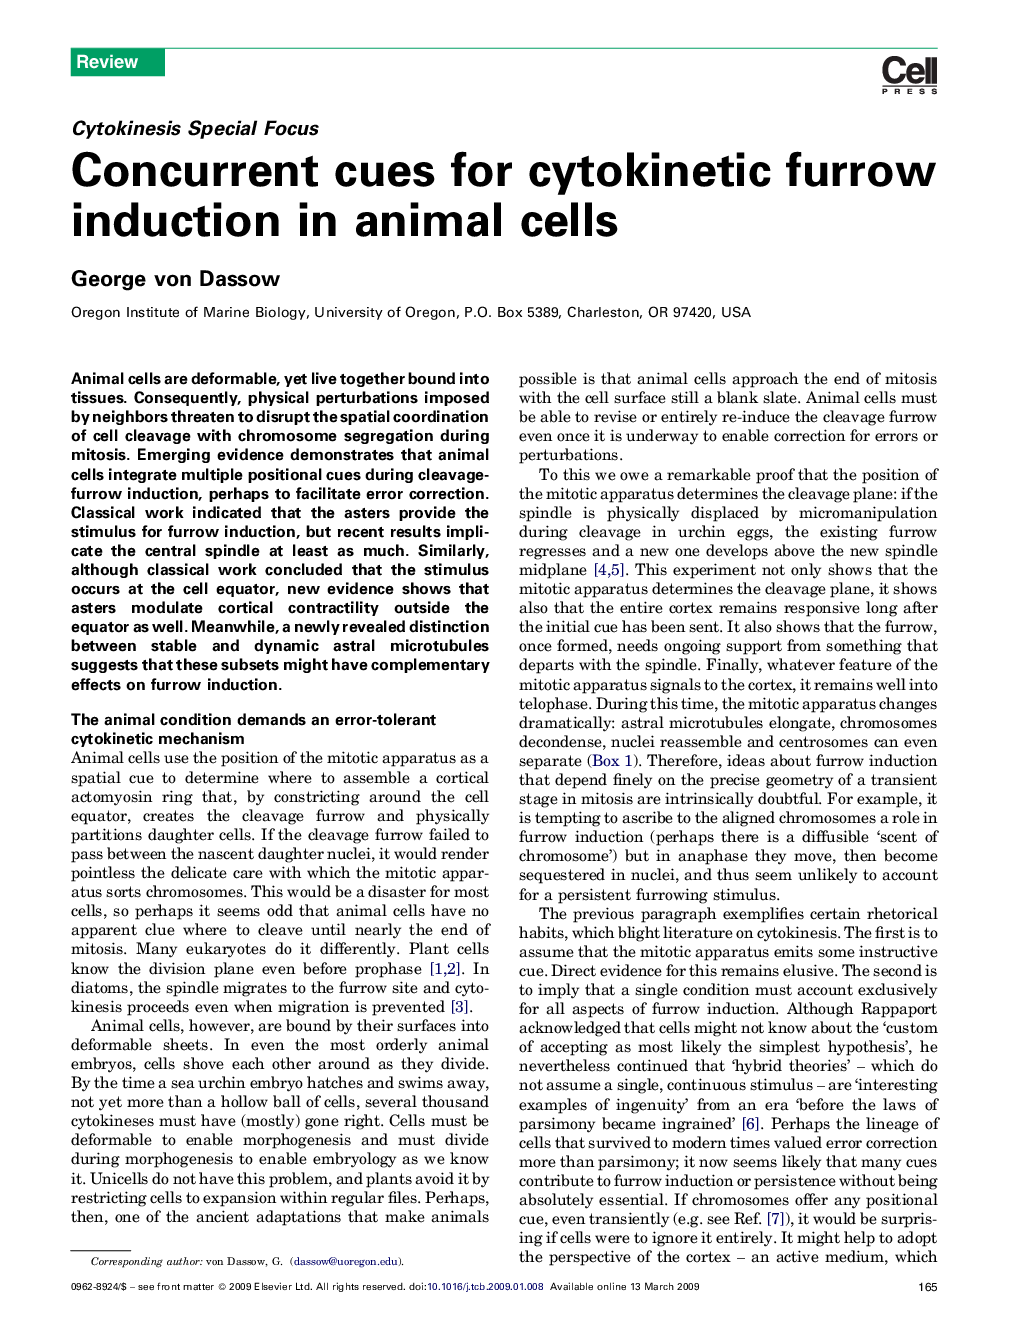 Concurrent cues for cytokinetic furrow induction in animal cells